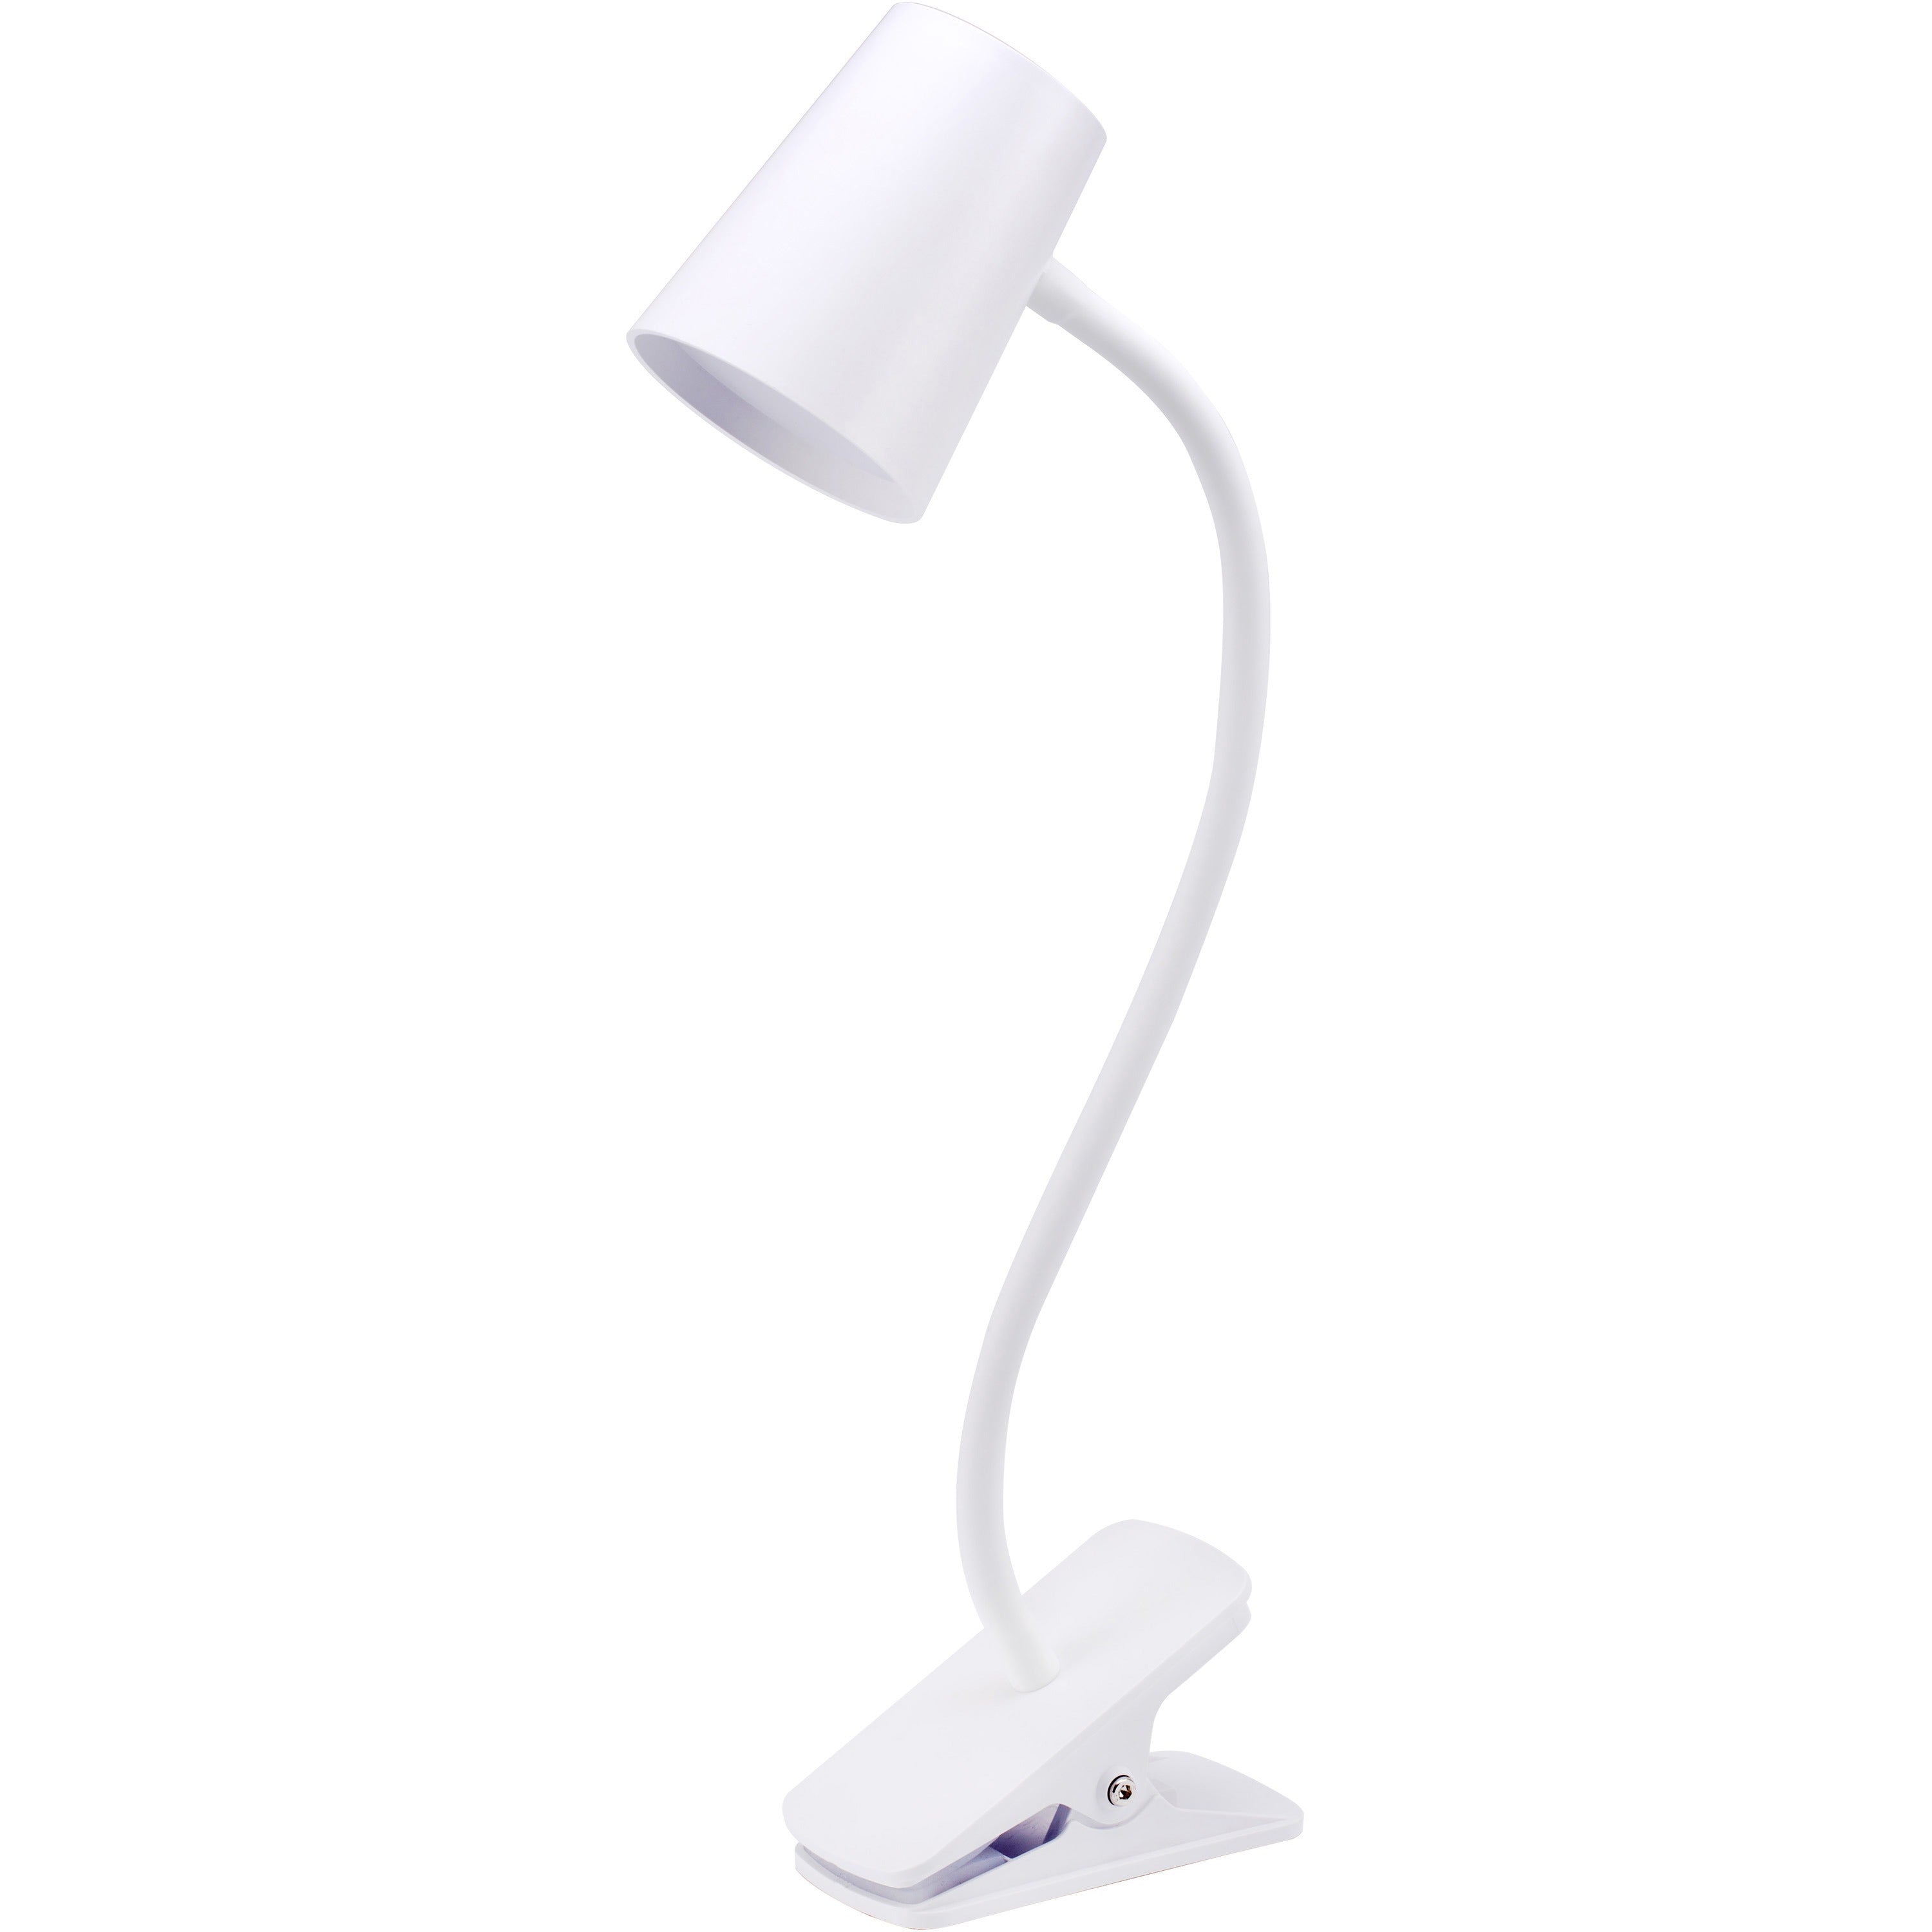 bostitch-adjustable-led-clamp-light-520-w-led-bulb-adjustable-flexible-neck-adjustable-head-silicone-desk-mountable-wall-mountable-white-for-desk-cubicle-home-office-classroom-communal-area_bosled2103 - 1